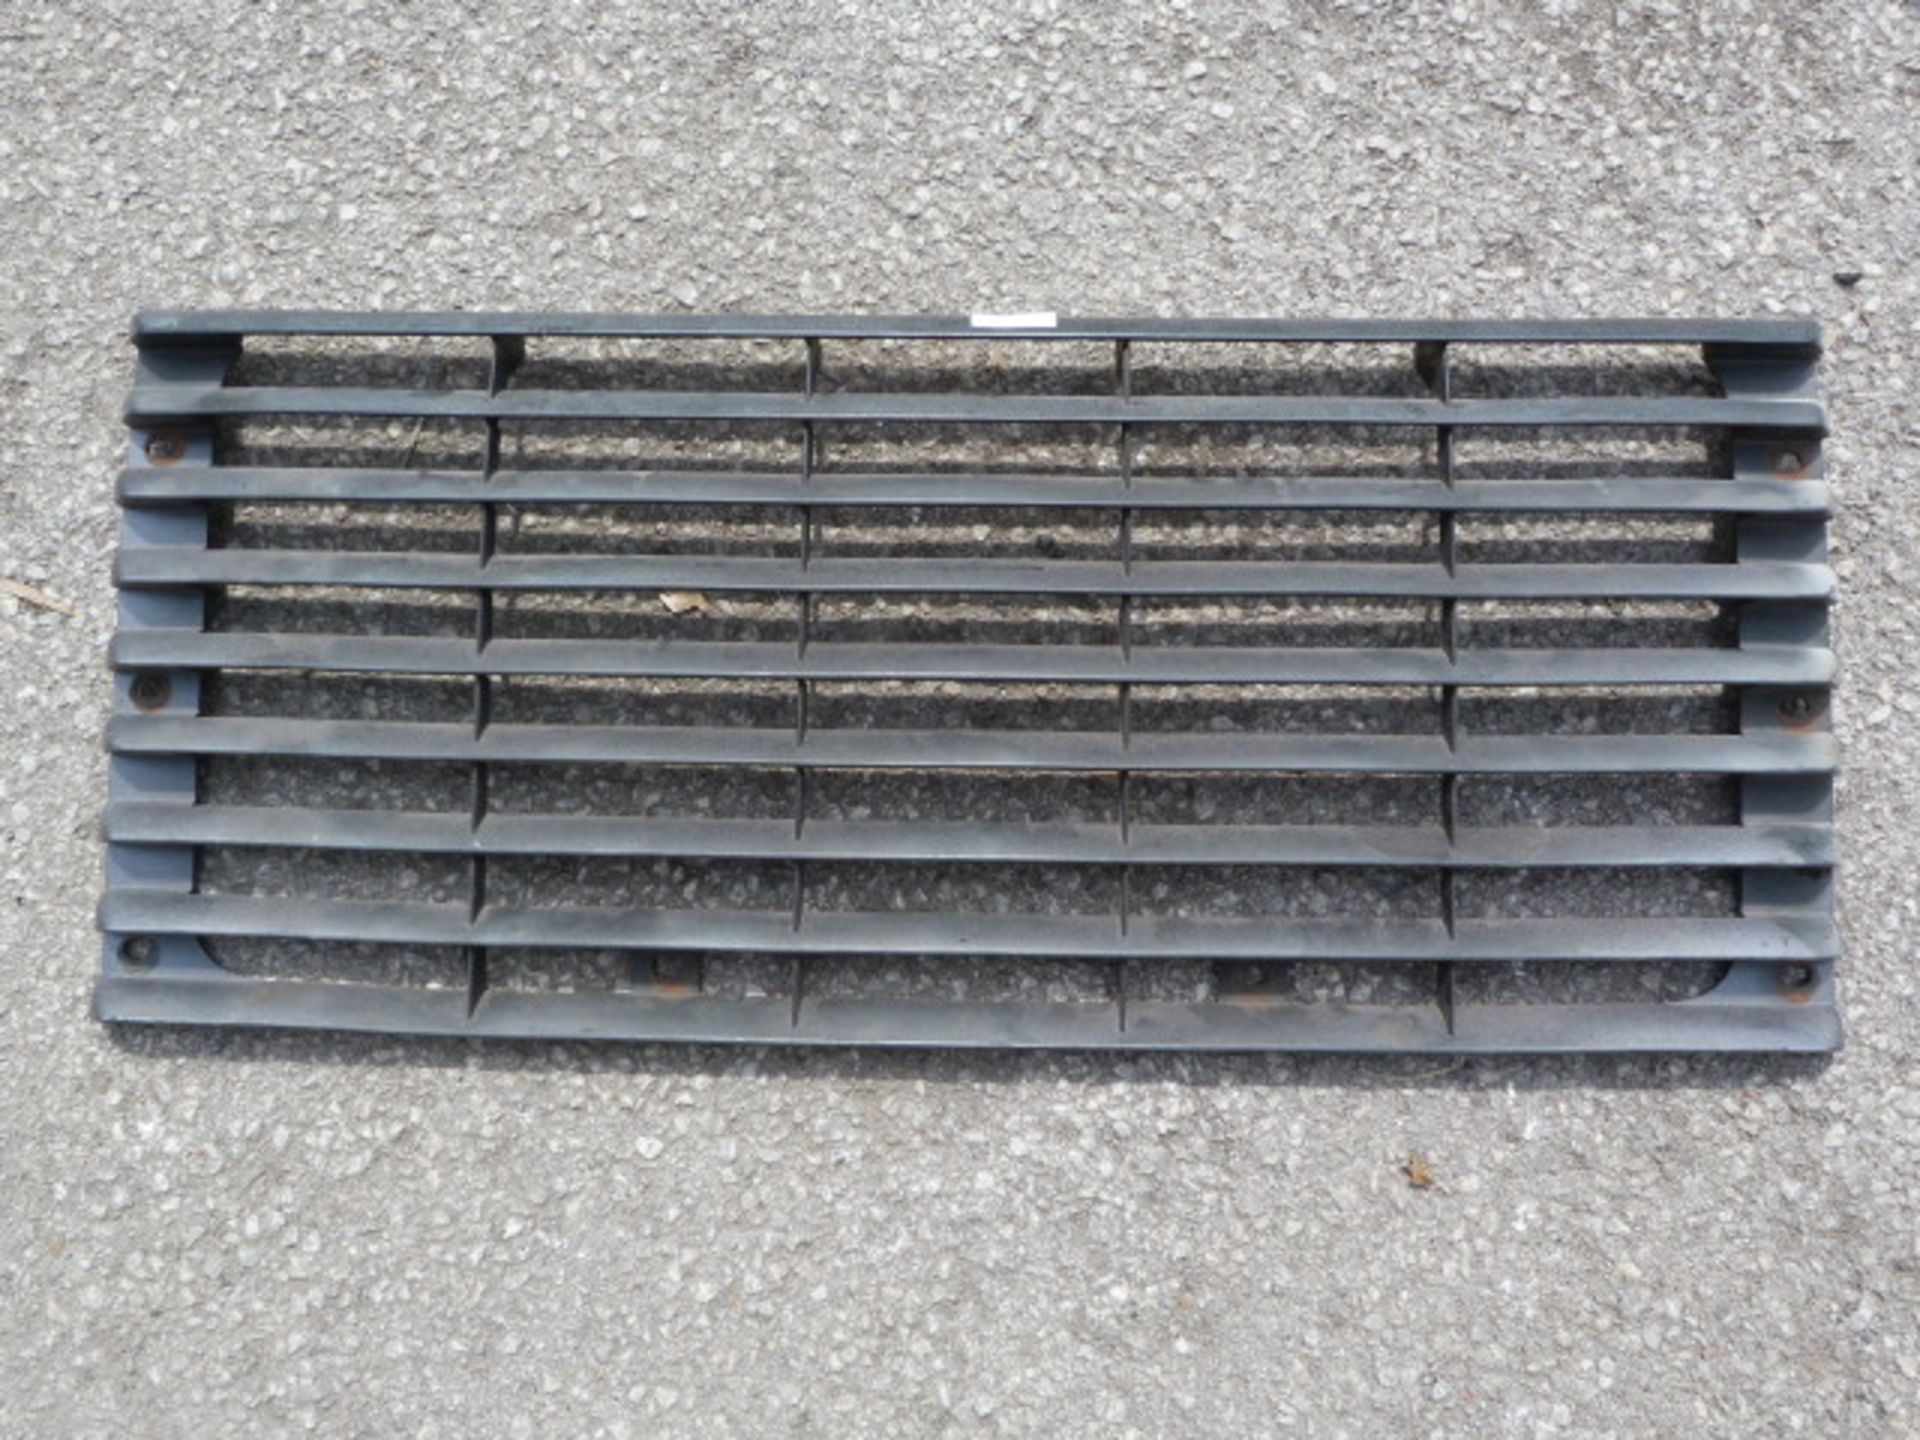 Land Rover Front Grill